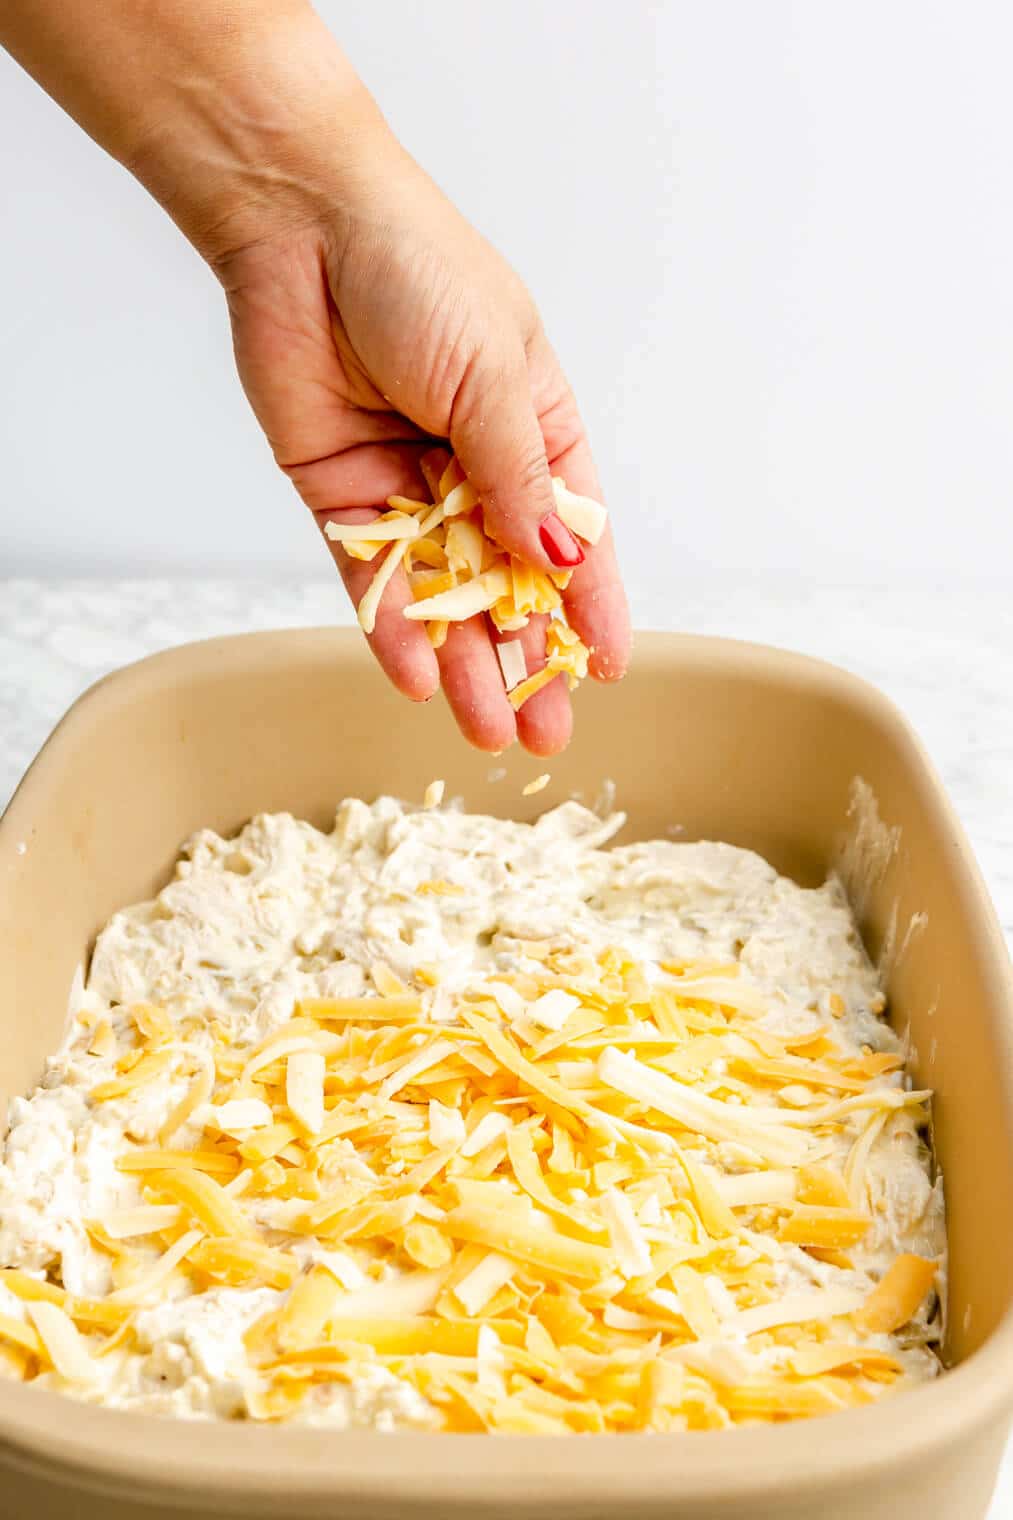 Hand sprinkling shredded cheese on top of the creamy chicken layer in a casserole dish.